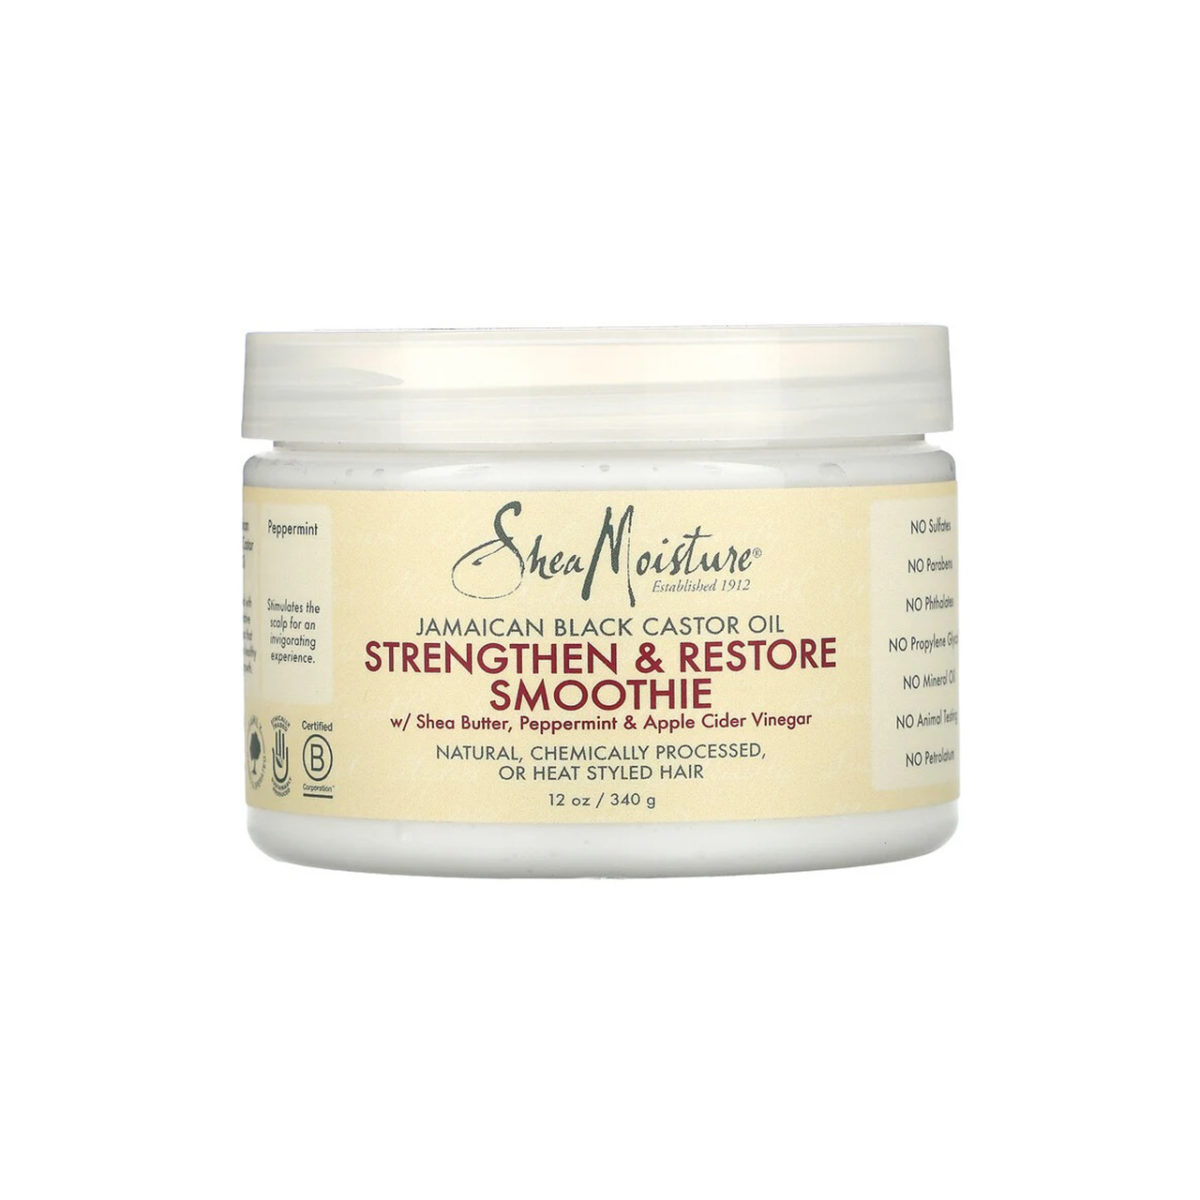 SheaMoisture - Strengthen & Restore Smoothie Jamaican Black Castor Oil Ohmykajo curly hair care, hair loss treatment, curly hair products SheaMoisture - Strengthen & Restore Smoothie Jamaican Black Castor Oil